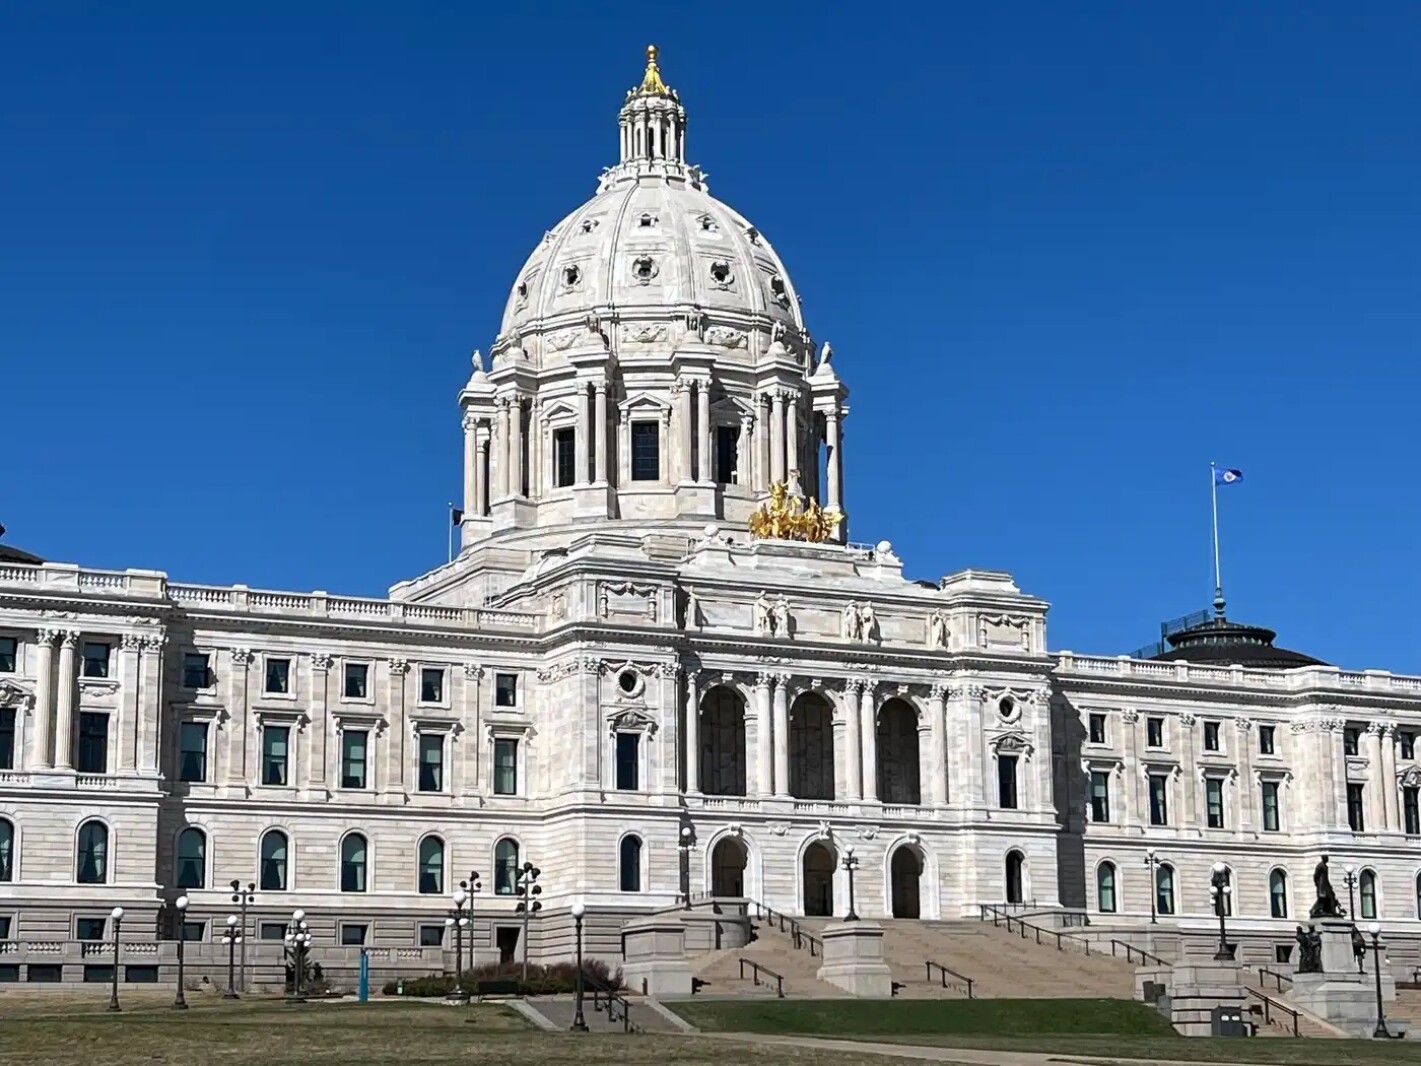  Welcome to the ‘season of disappointments’ — where bills make it (or don’t) at Minnesota Capitol 